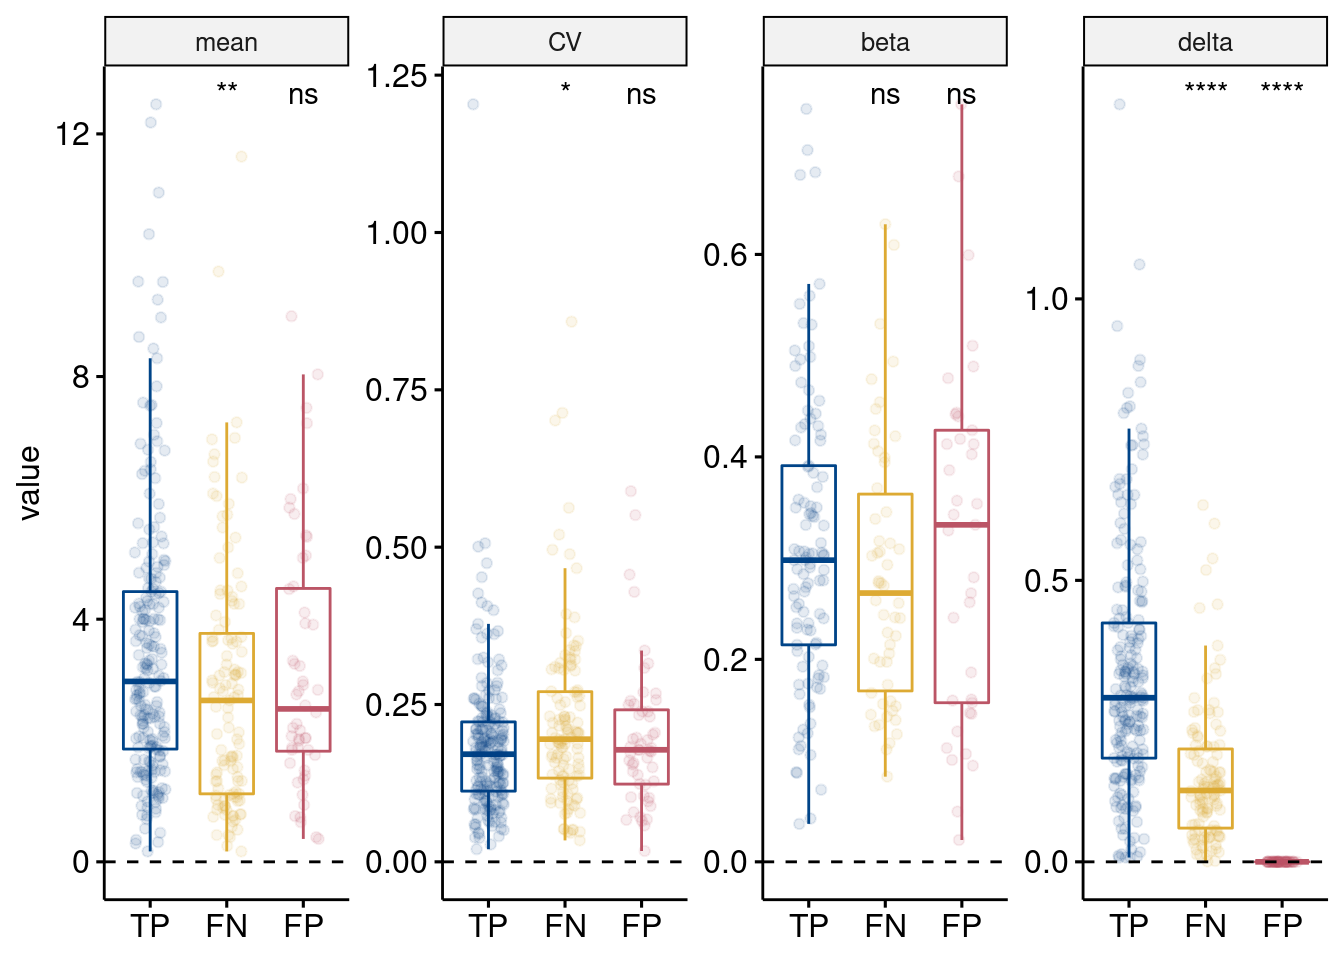 Simulated properties of TP, FN, FP, and TN DE genes from MAST. Properties are (left to right) simulated gene mean, gene variance (coefficient of variation), eQTL effect size (beta) if the gene was simulated as an eGene (i.e. zeros, or no eQTL effect, values were removed), and the DE effect size (delta). No delta for FP and TN genes as they were not simulated as DEG. Results from t-tests compared to TP are shown (ns: p > 0.05; $*$: p <= 0.05; $**$: p <= 0.01; $***$: p <= 0.001; $****$: p <= 0.0001)